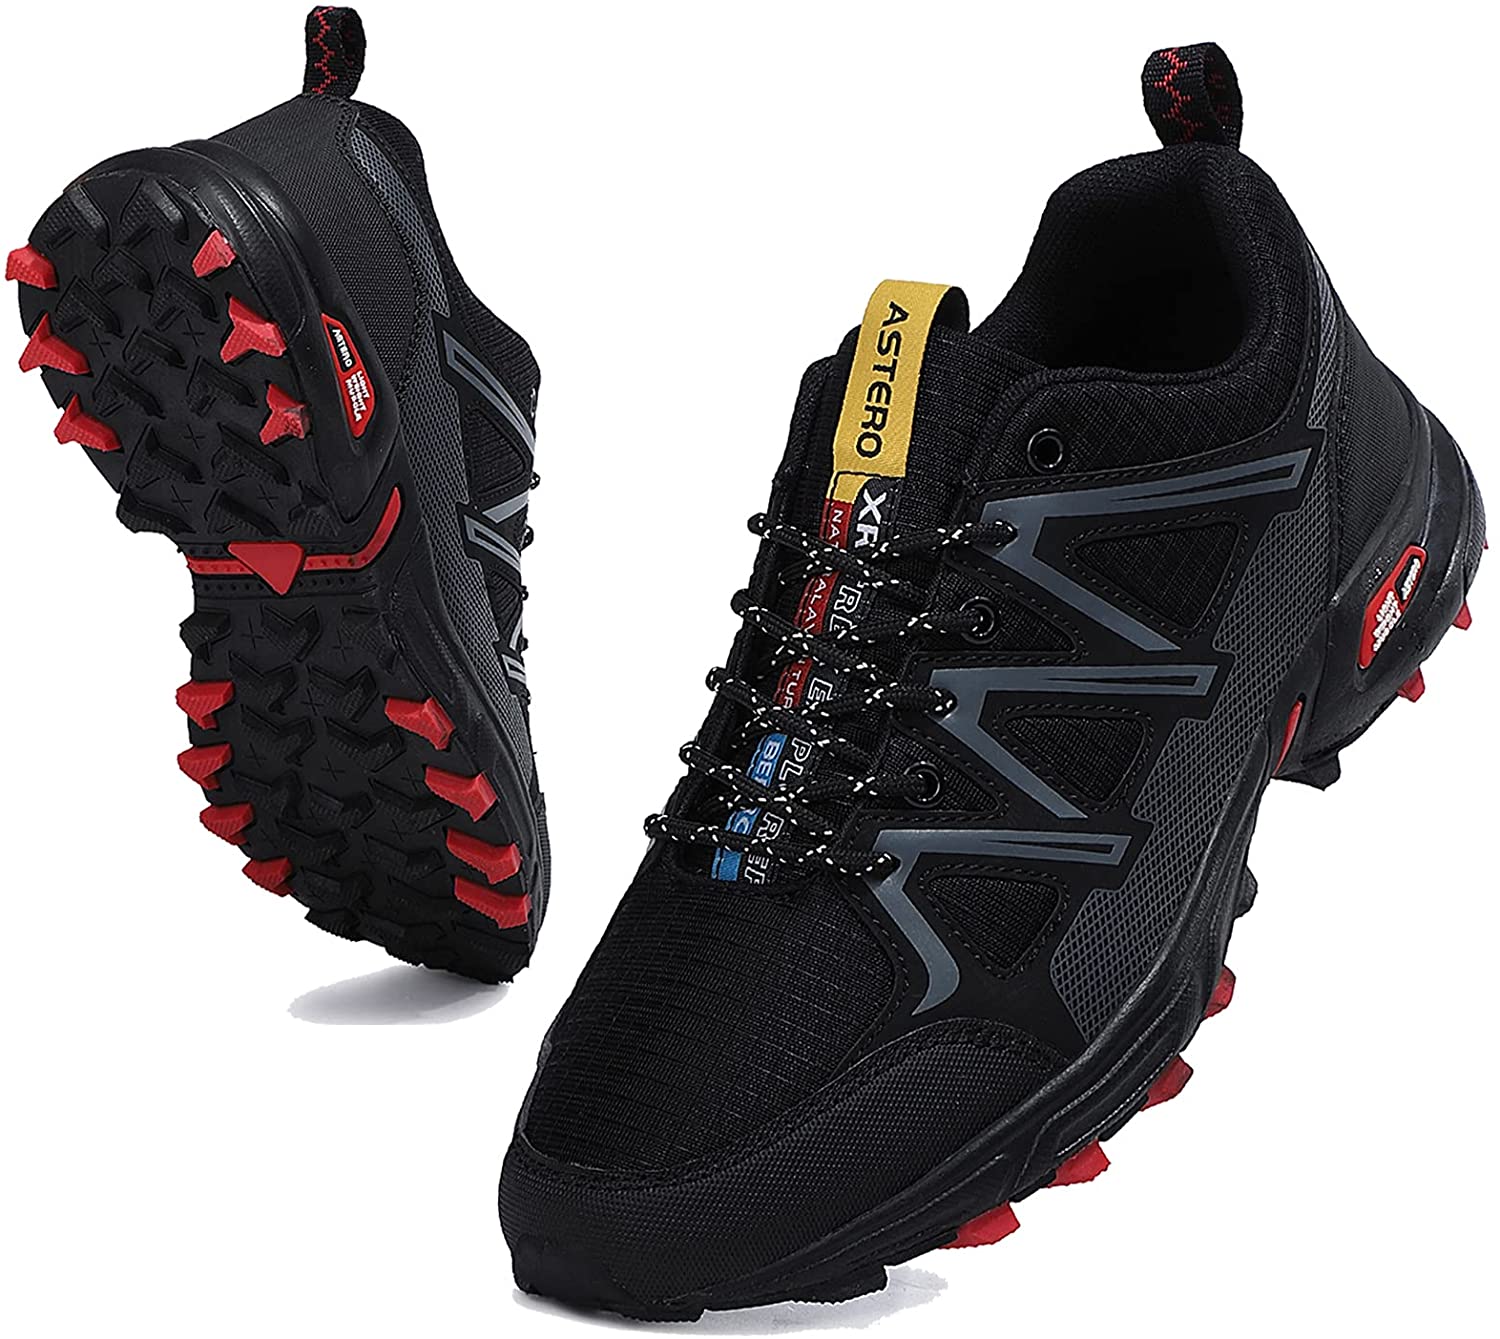 AX BOXING Men's Trail Running Shoes Anti-Skid Athletic Road Running Footwear Walking Shoes 